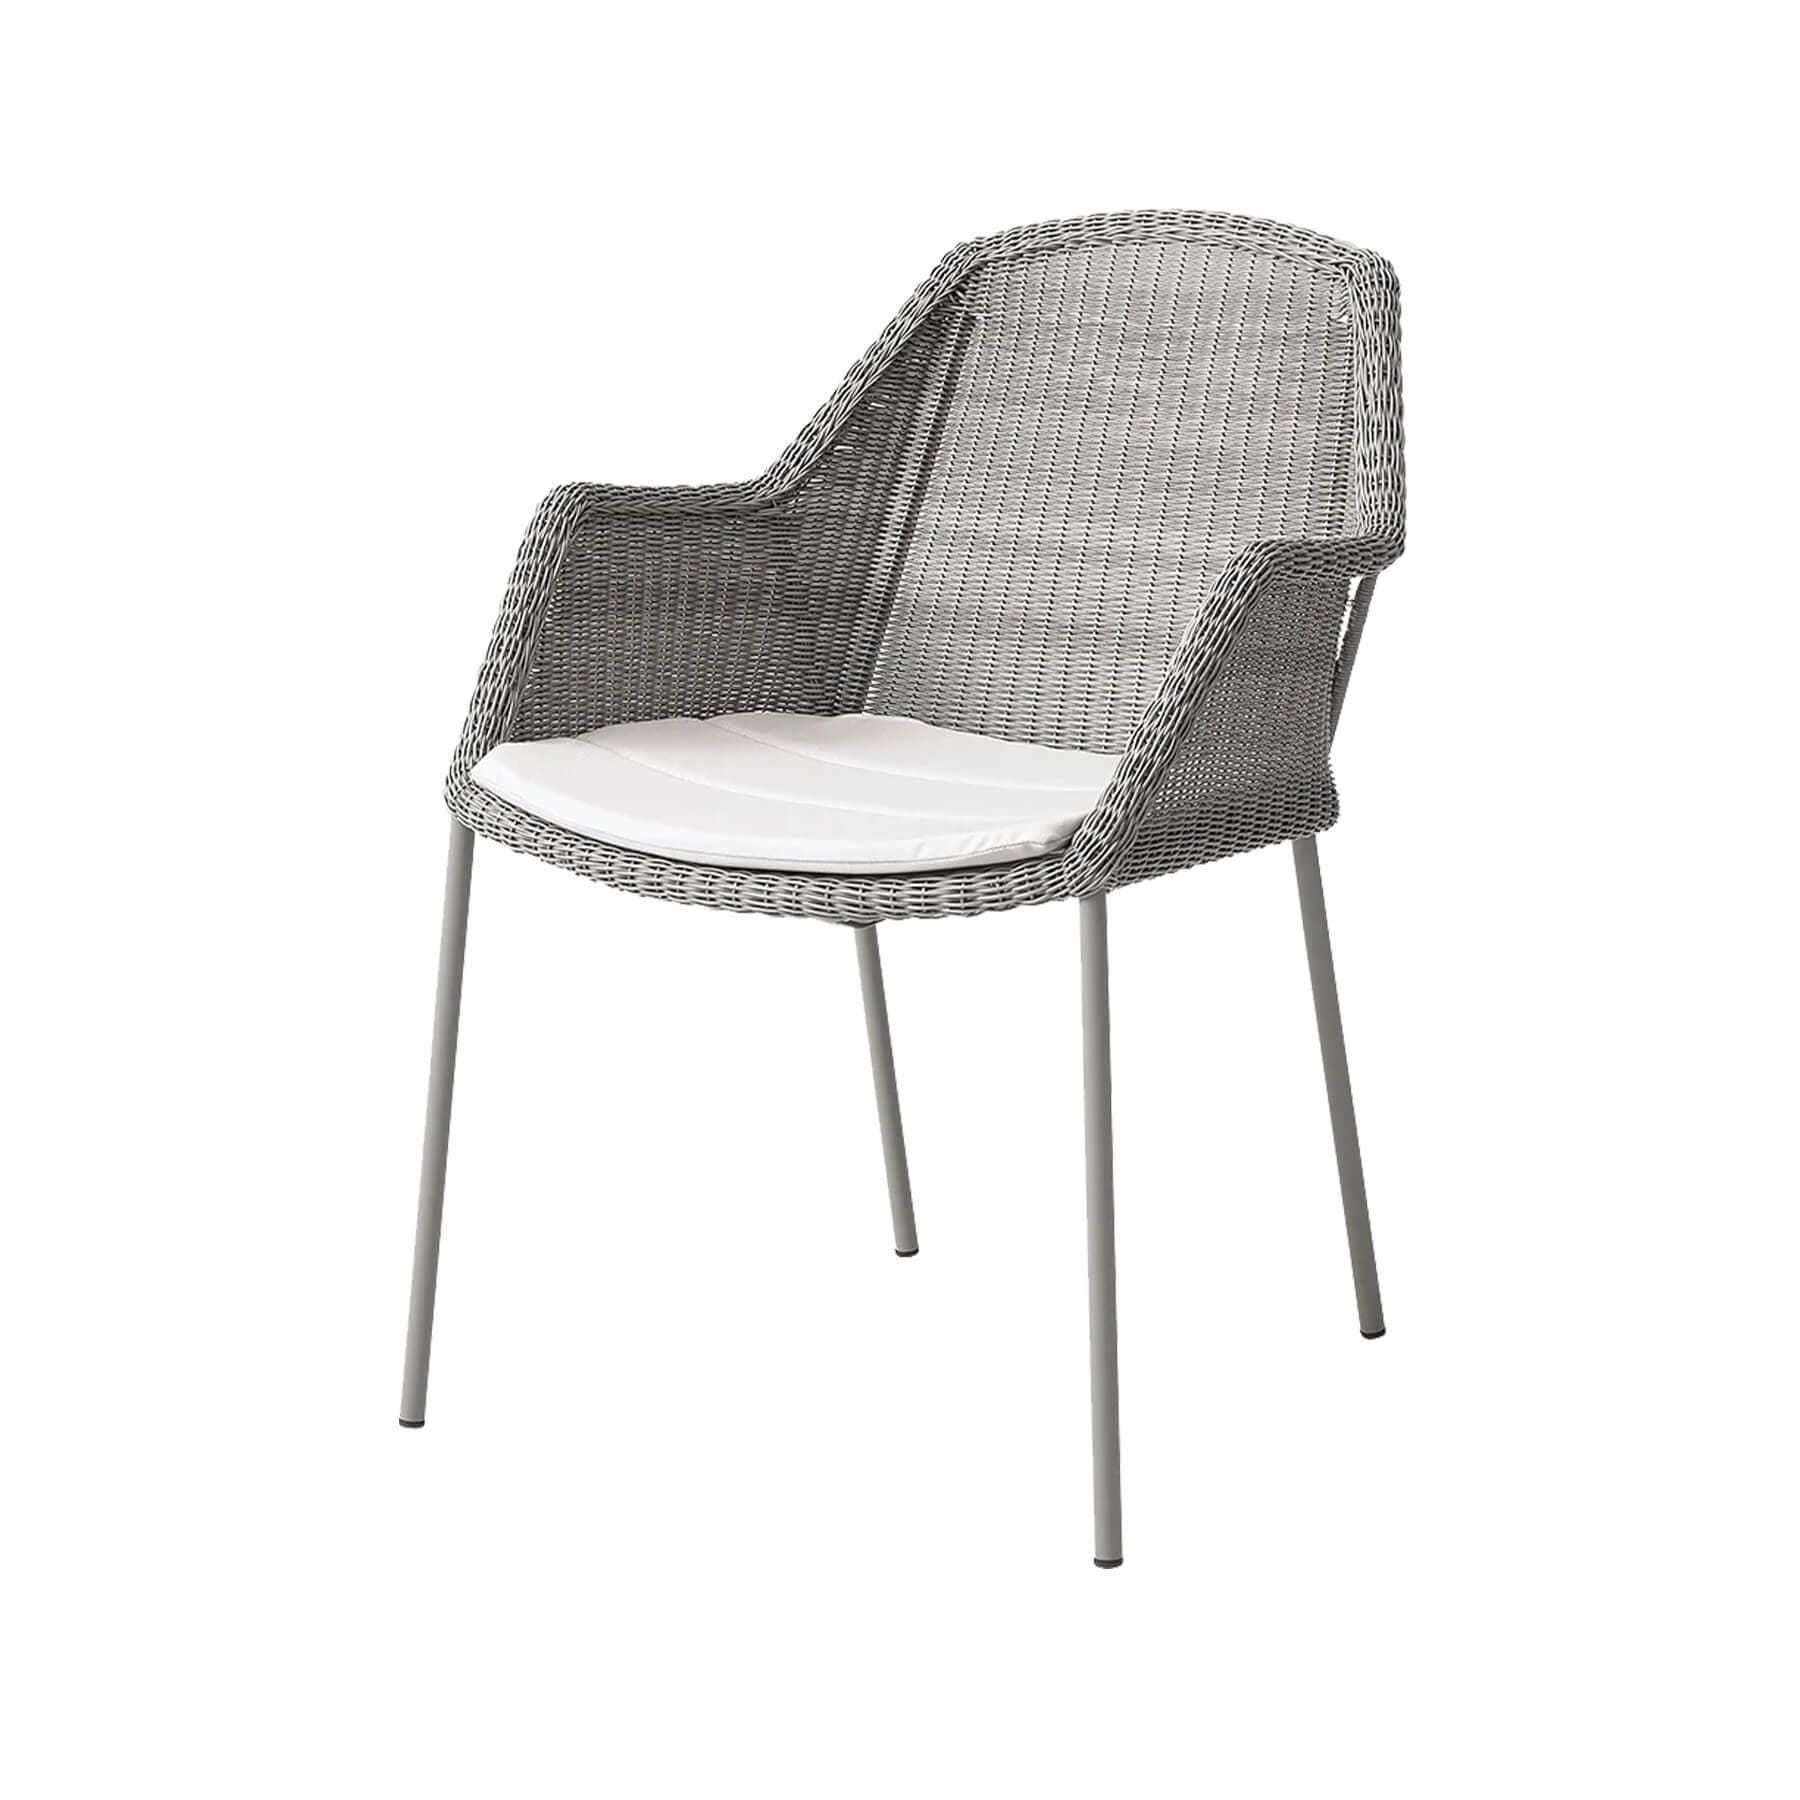 Caneline Breeze Outdoor Chair Taupe Seat White Cushion Grey